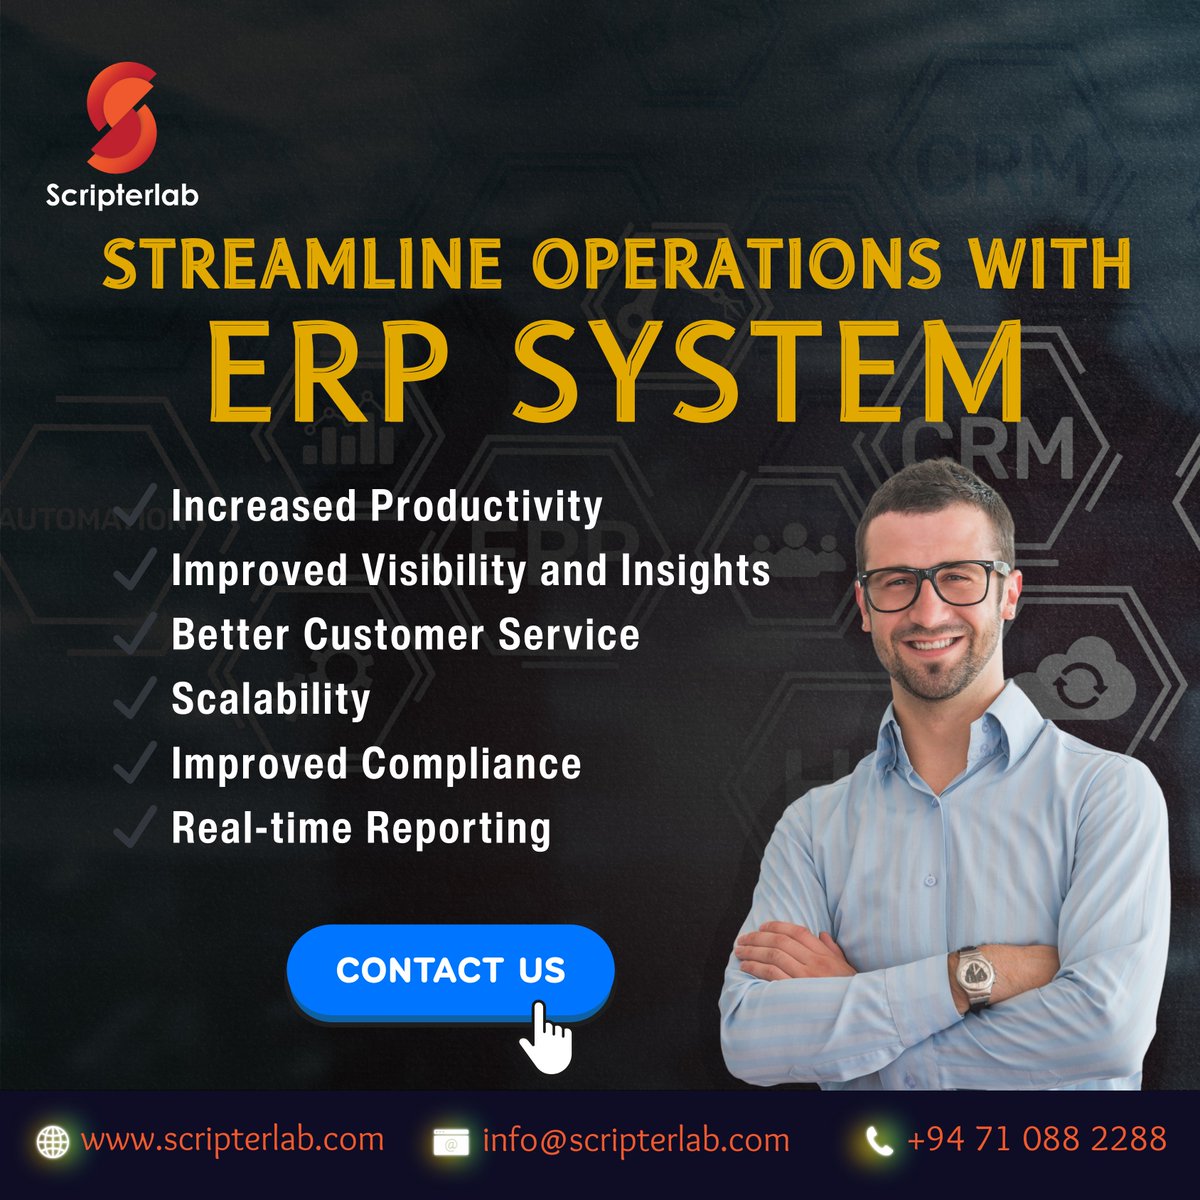 Is your current system holding you back?
Our ERP services can help you gain real-time insights, improve data accuracy, and boost your bottom line.

Contact us
Call: +94 710 882 288
WhatsApp: wa.link/282uvs

#Scripterlab #DigitalEngineering #GrowYourBusiness #ERPSolutions